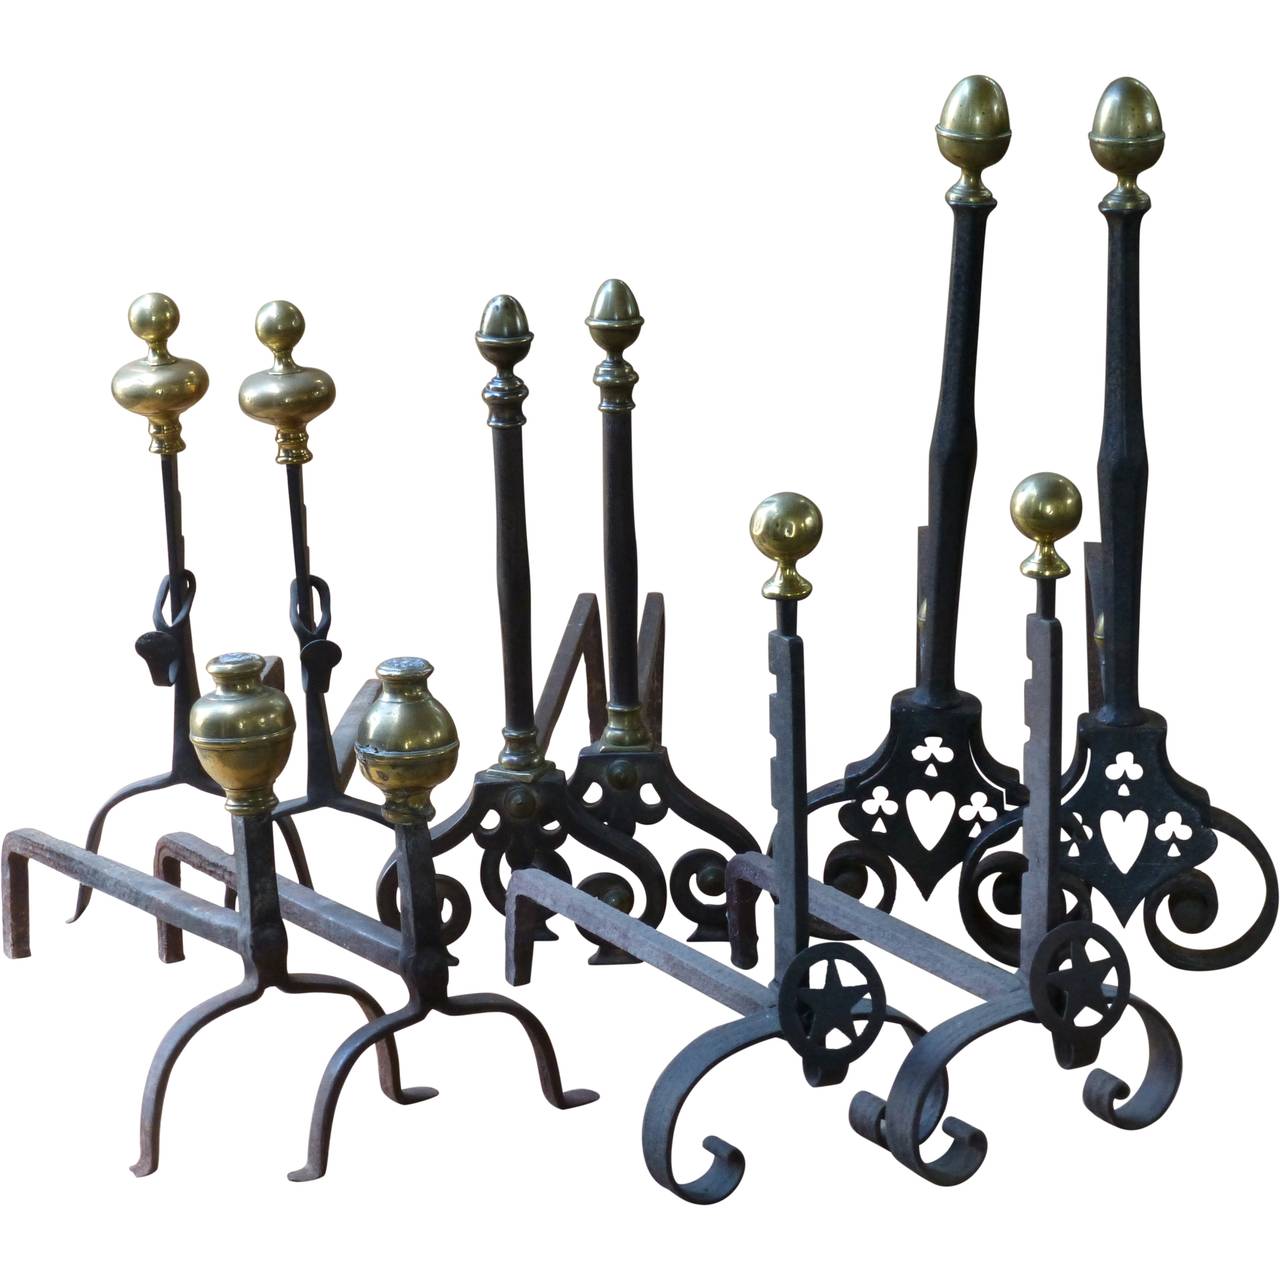 Antique French Andirons or Fire Dogs. These andirons can be bought separately. Prices vary somewhat. The indicated price is the average excluding shipping to North-America and Europe.

You can see all our current andirons for sale at 1stdibs by